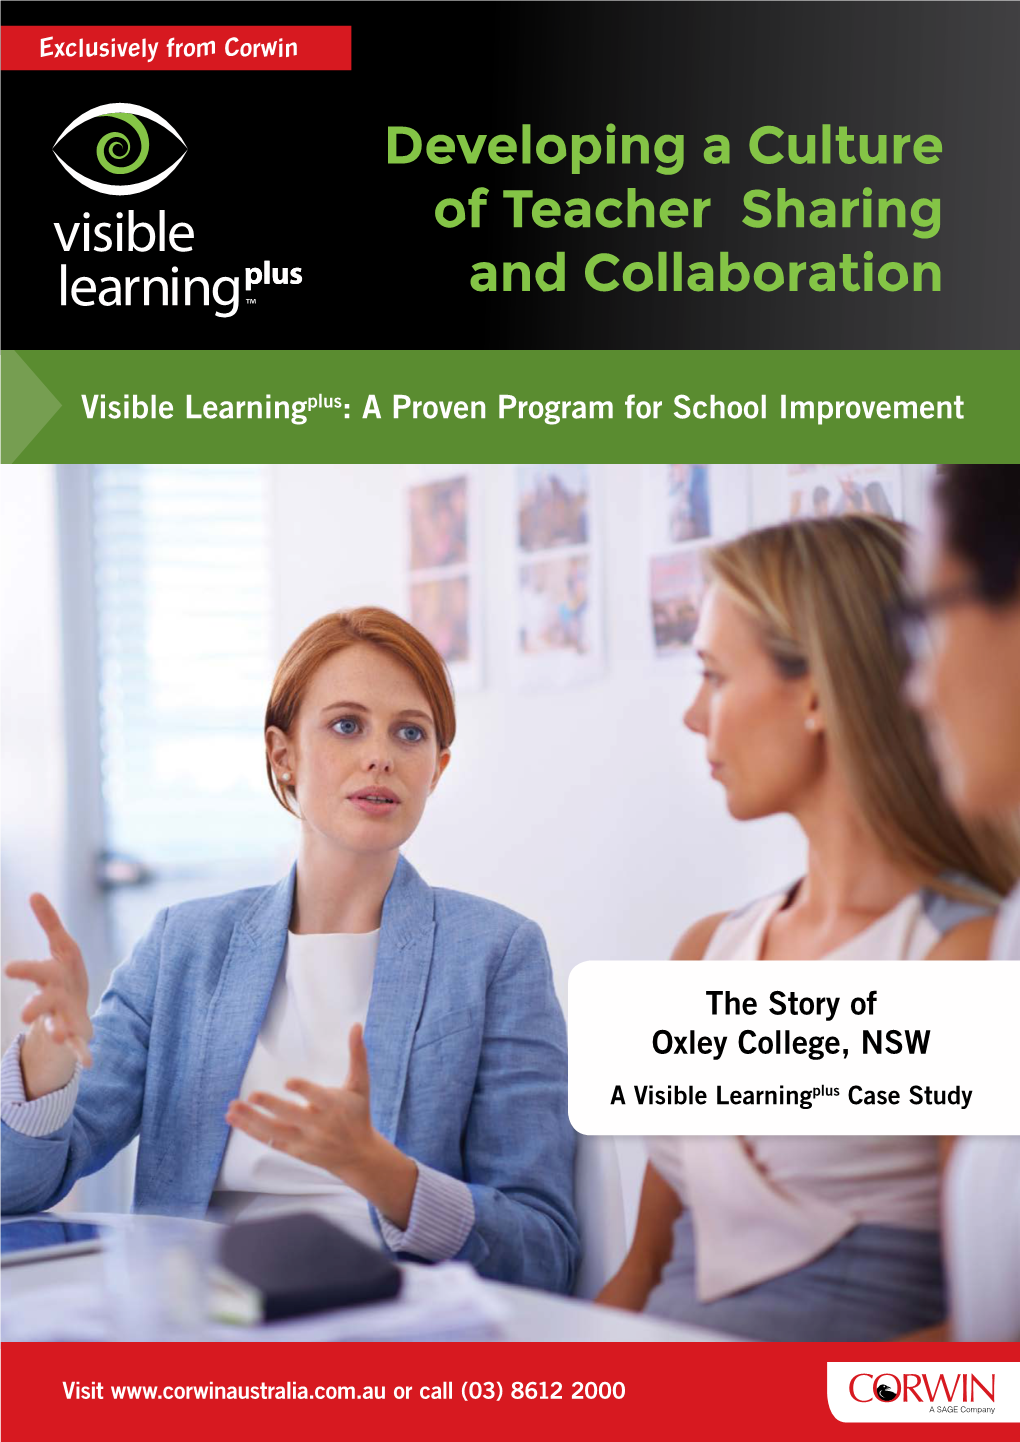 Developing a Culture of Teacher Sharing and Collaboration